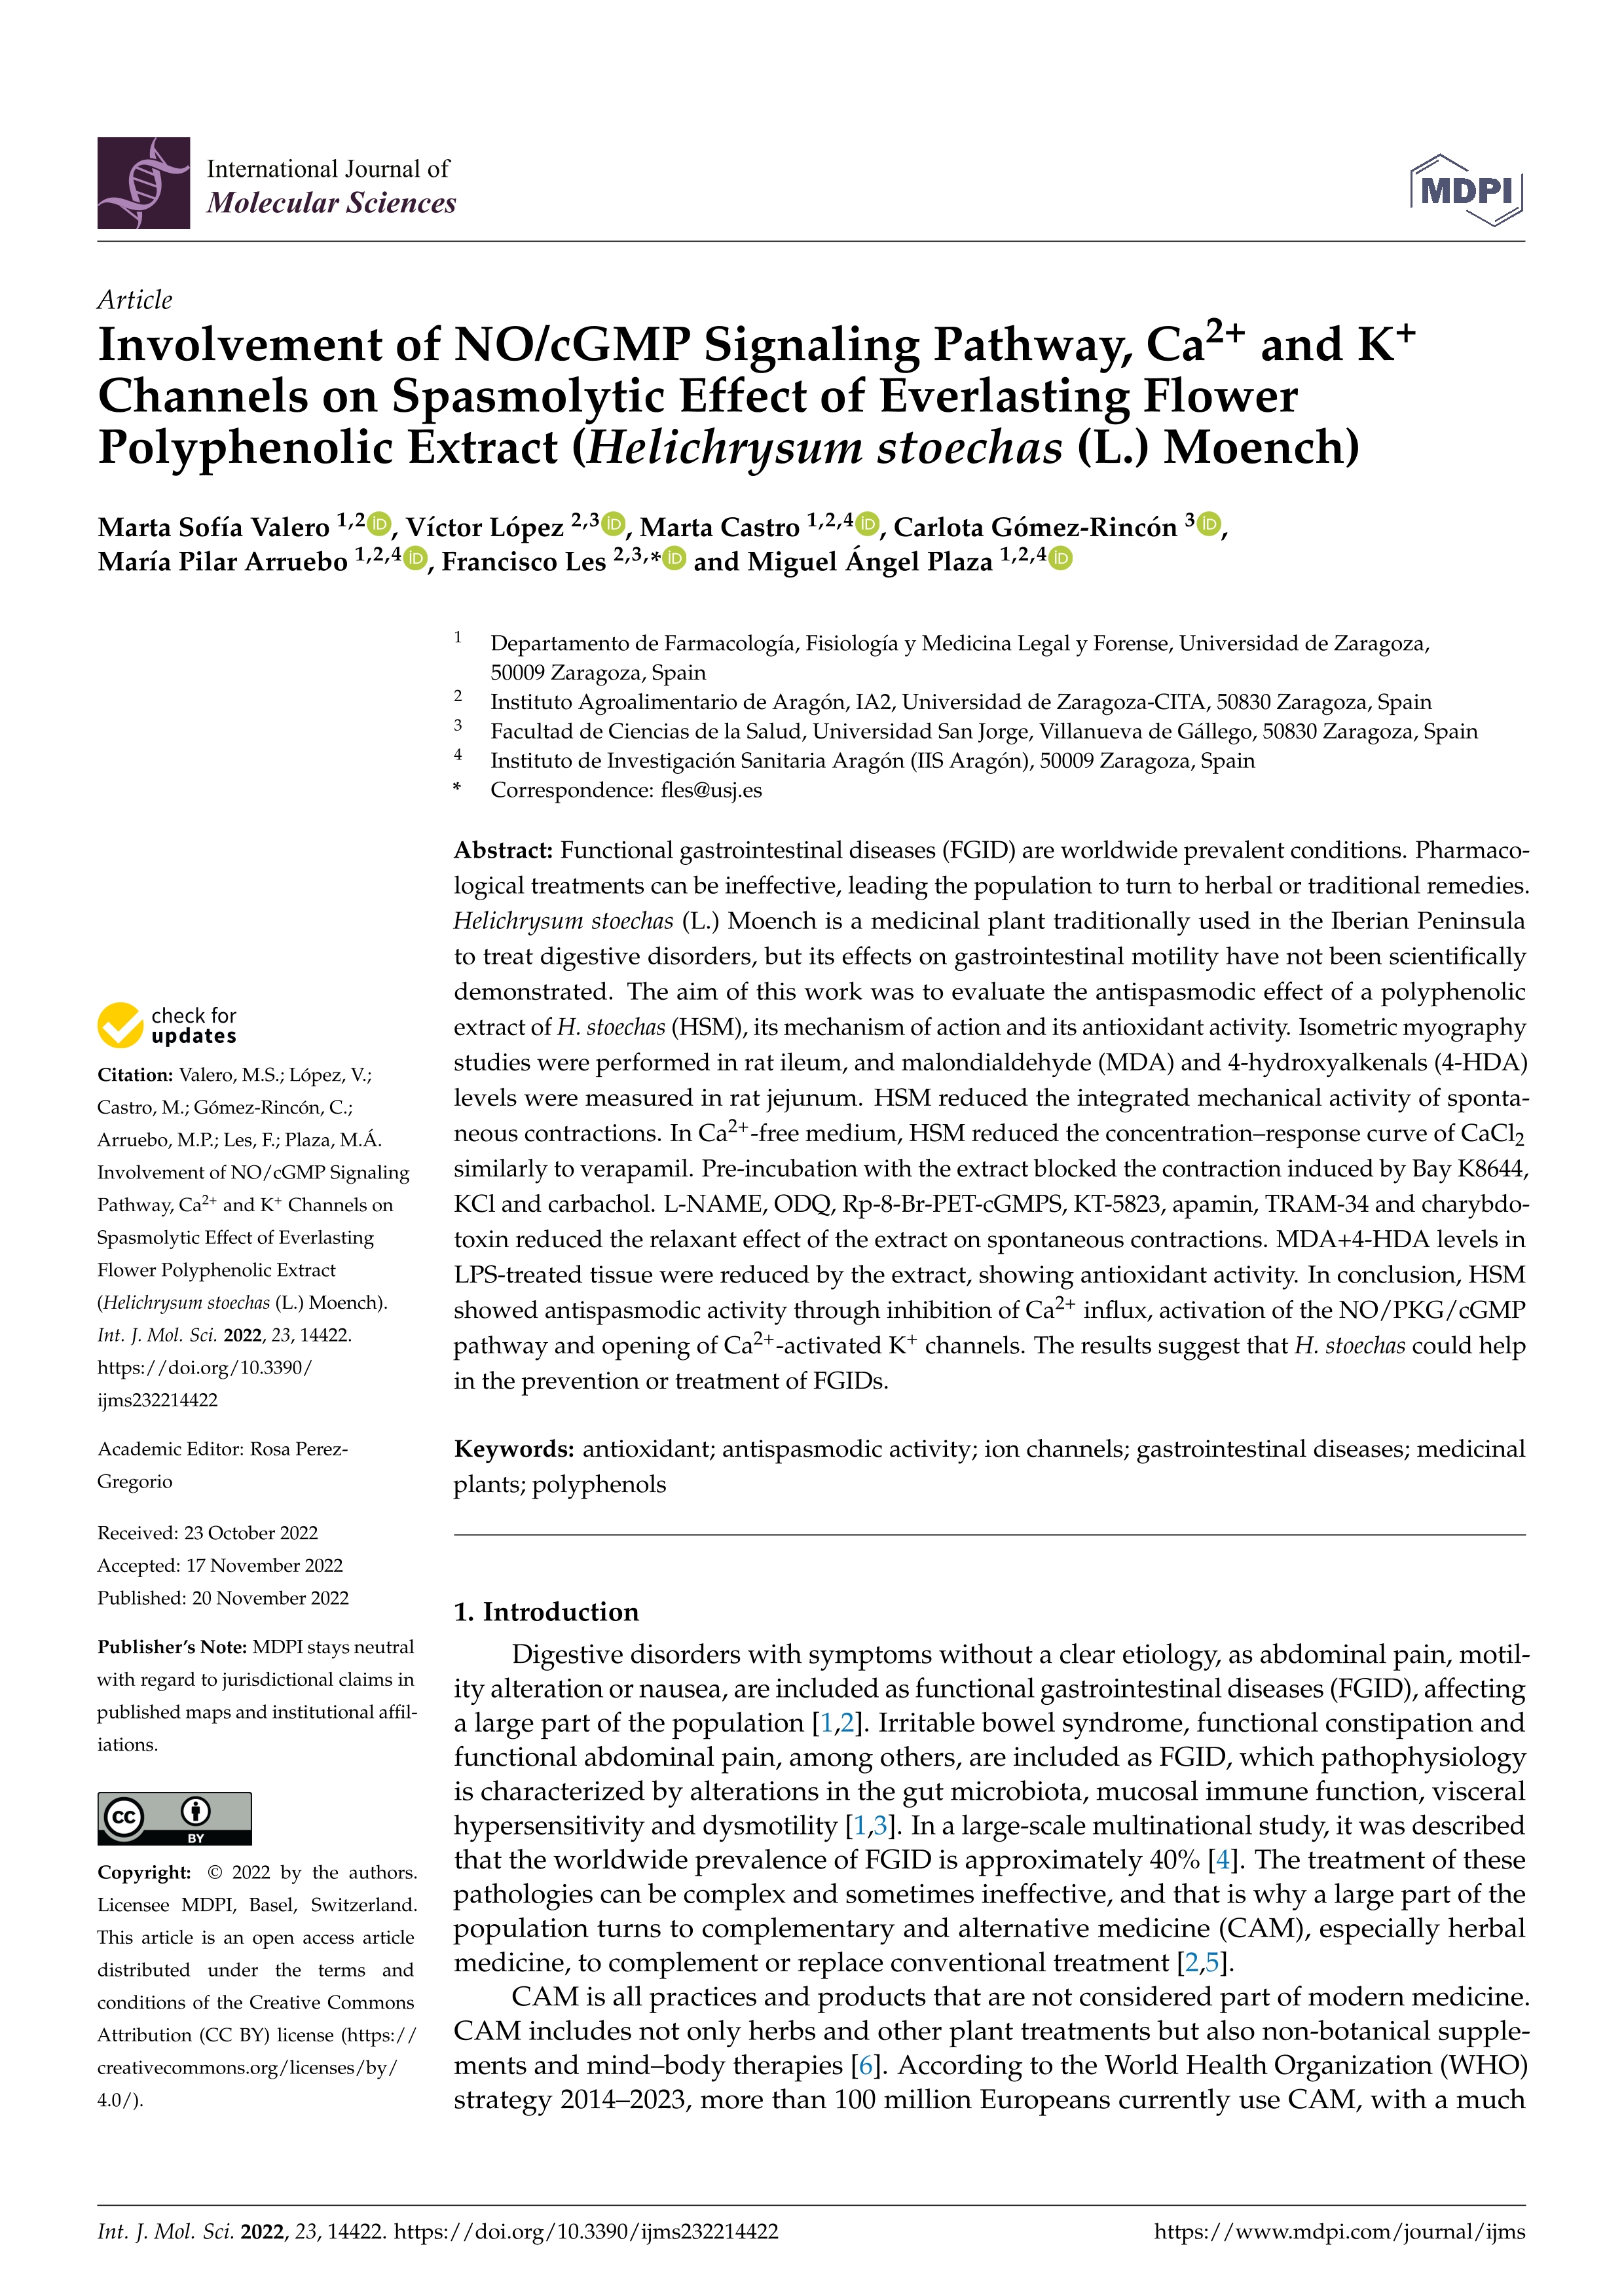 Involvement of NO/cGMP Signaling Pathway, Ca2+ and K+ Channels on Spasmolytic Effect of Everlasting Flower Polyphenolic Extract (Helichrysum stoechas (L.) Moench)